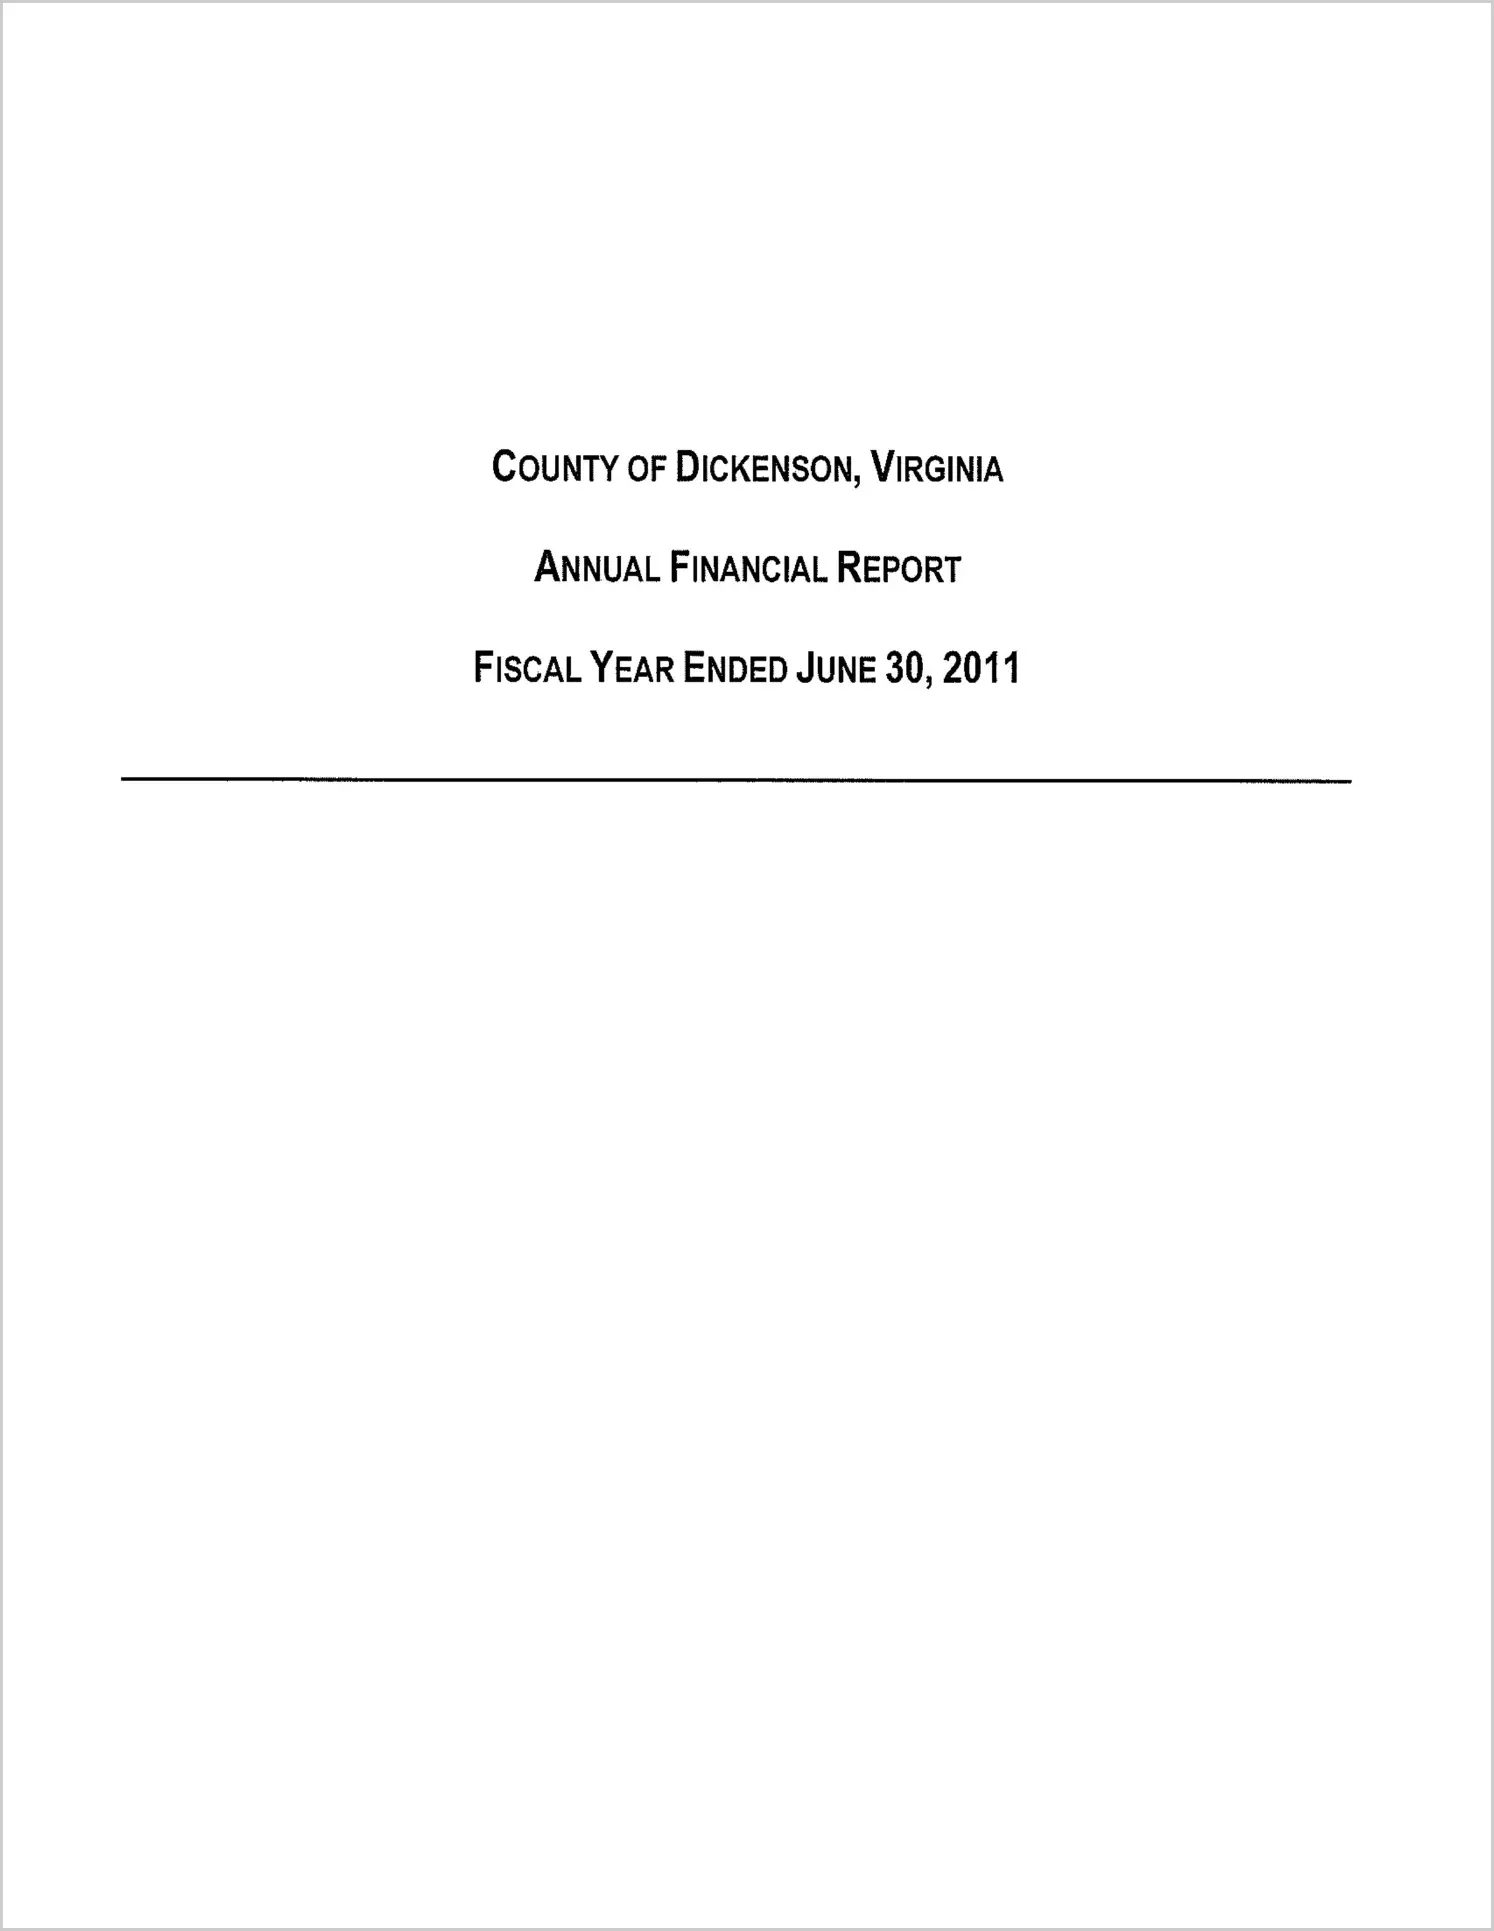 2011 Annual Financial Report for County of Dickenson